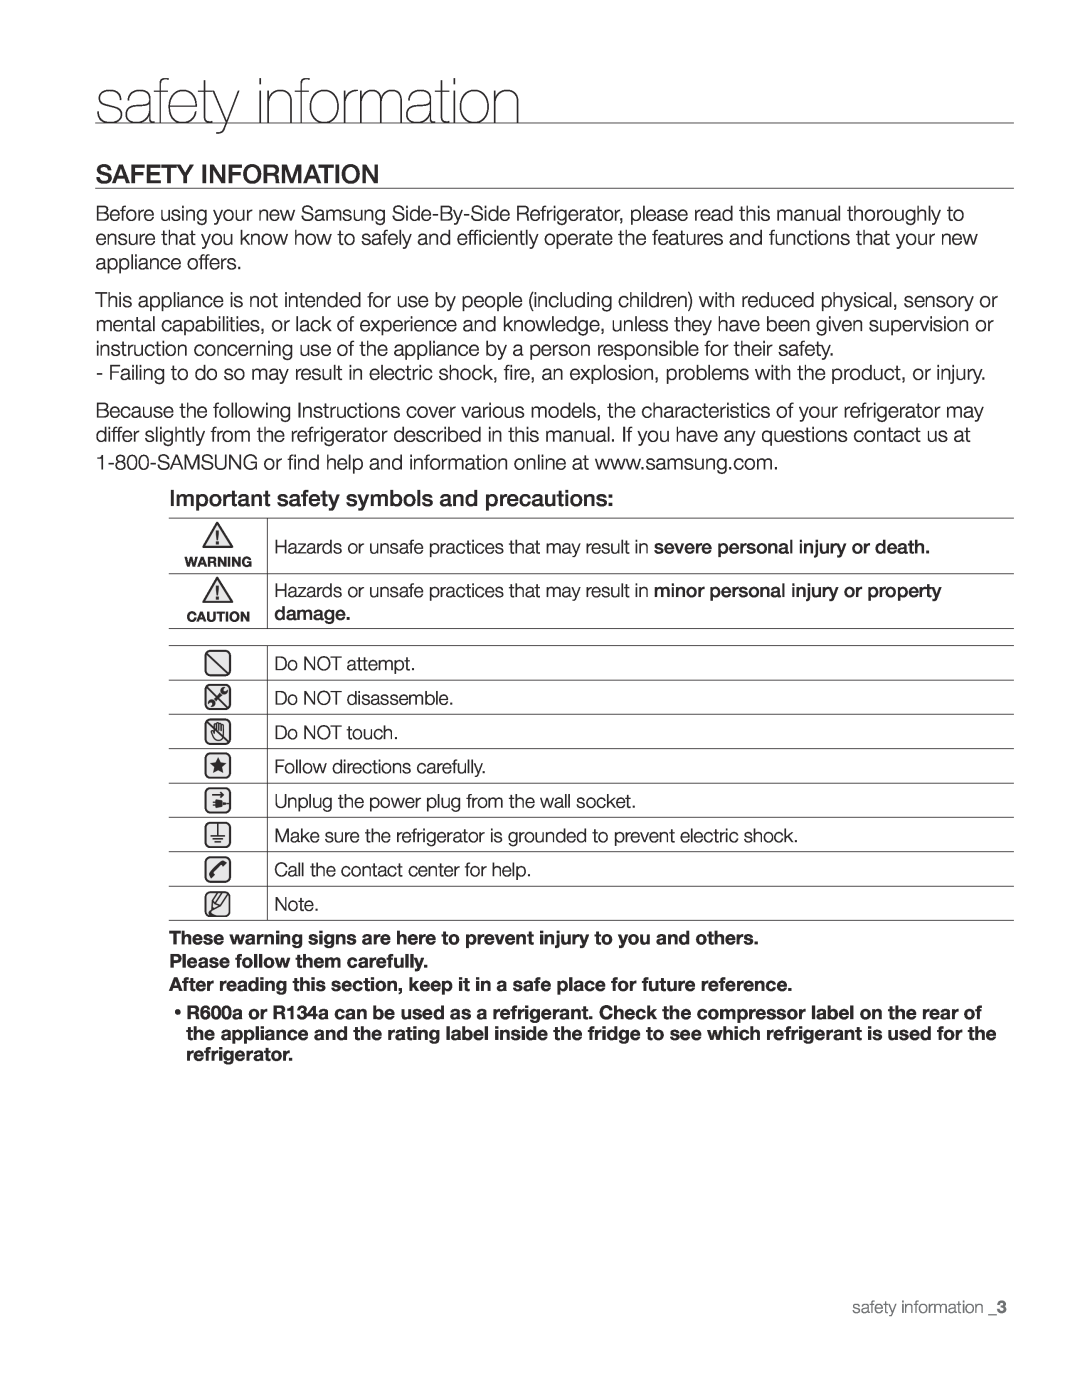 Samsung RS267TD, RS265TD user manual safety information, Safety Information, Important safety symbols and precautions 